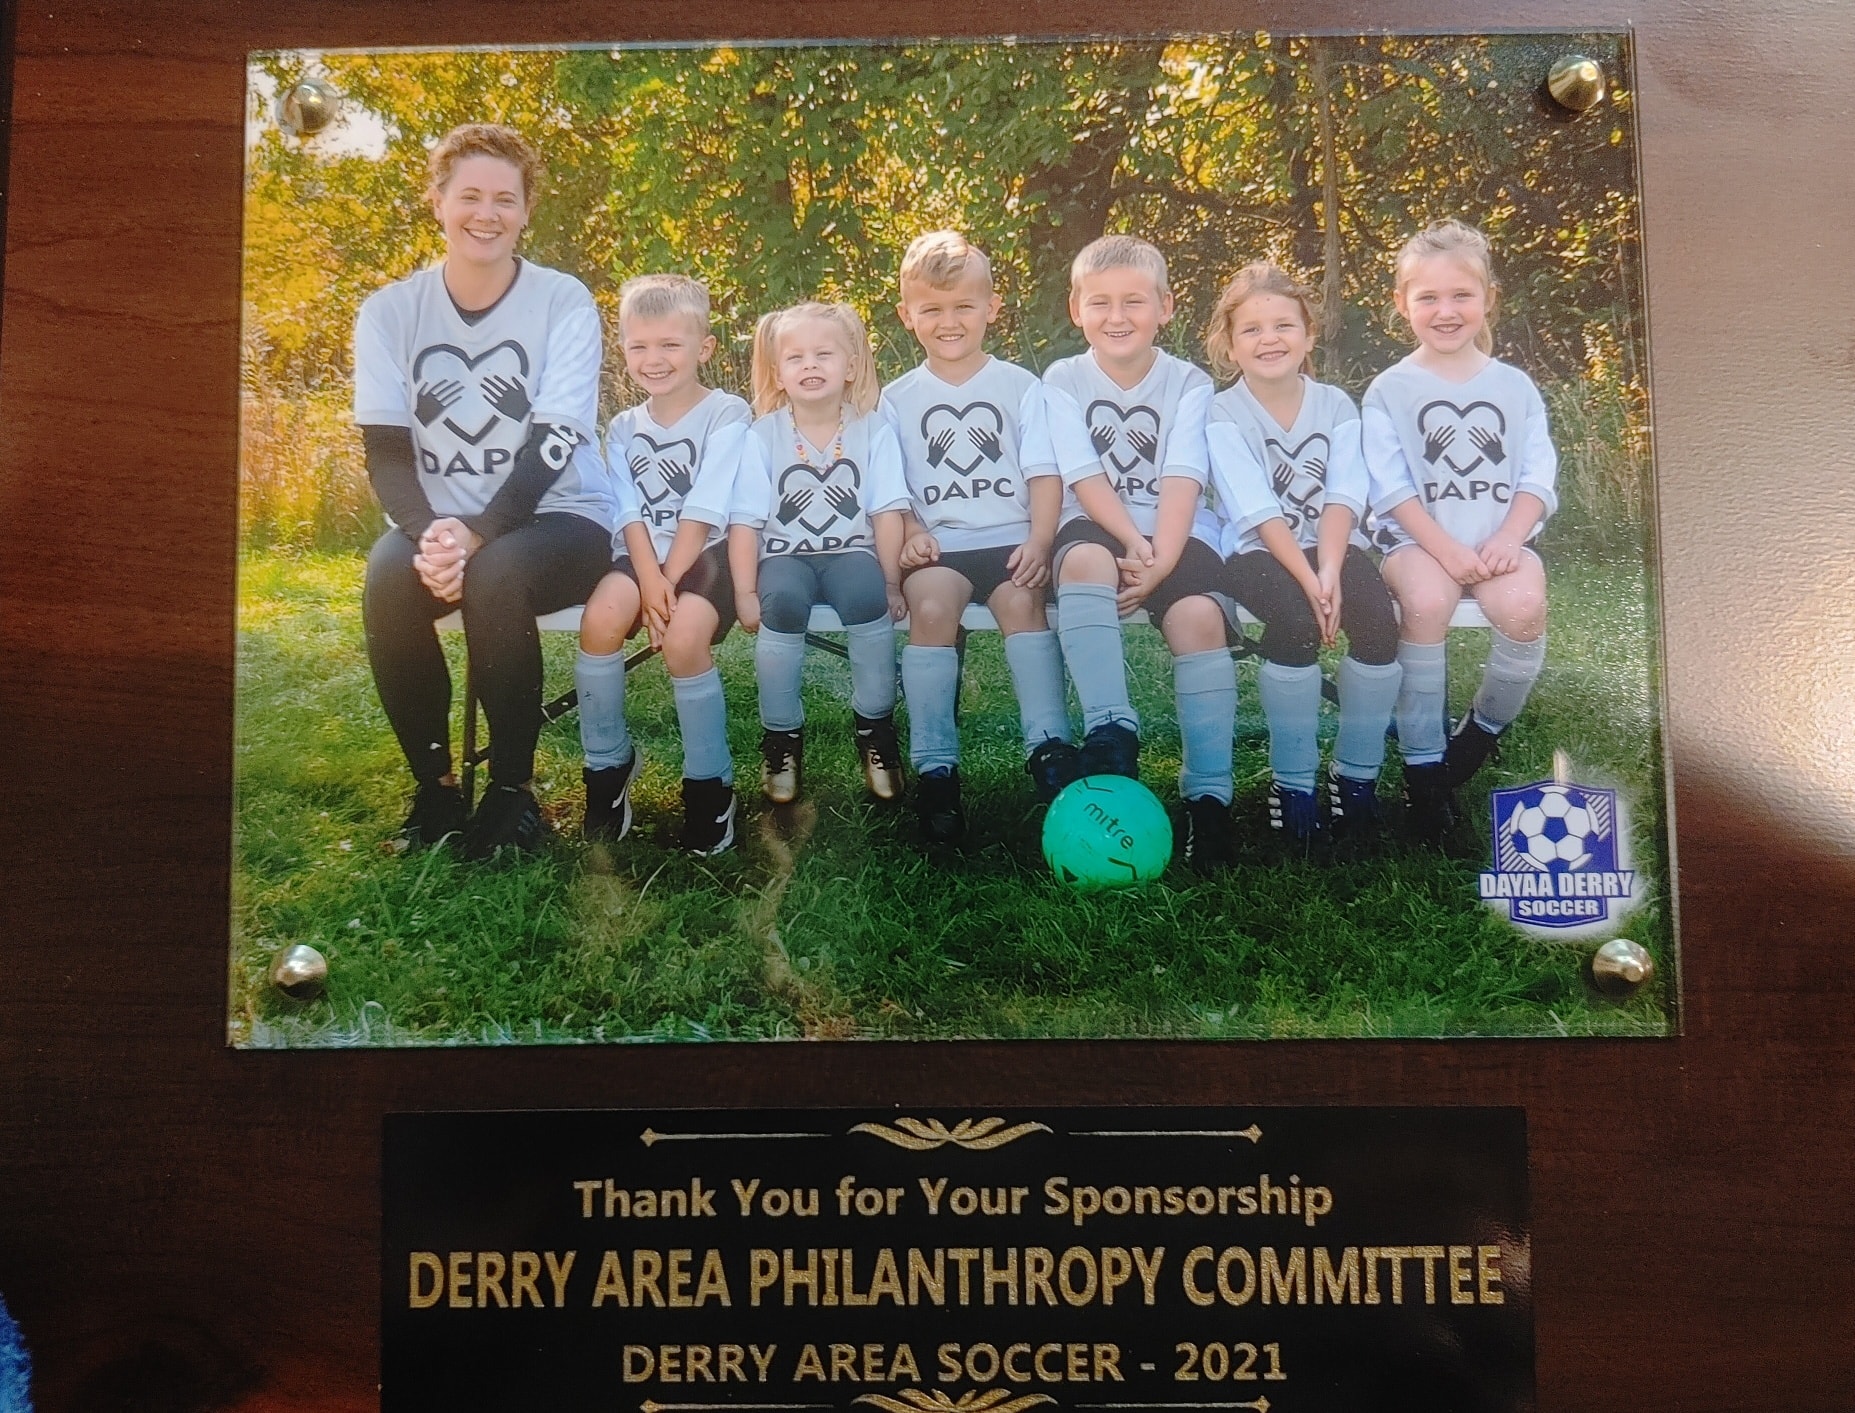 The DAPC is proud to sponsor youth sports programs